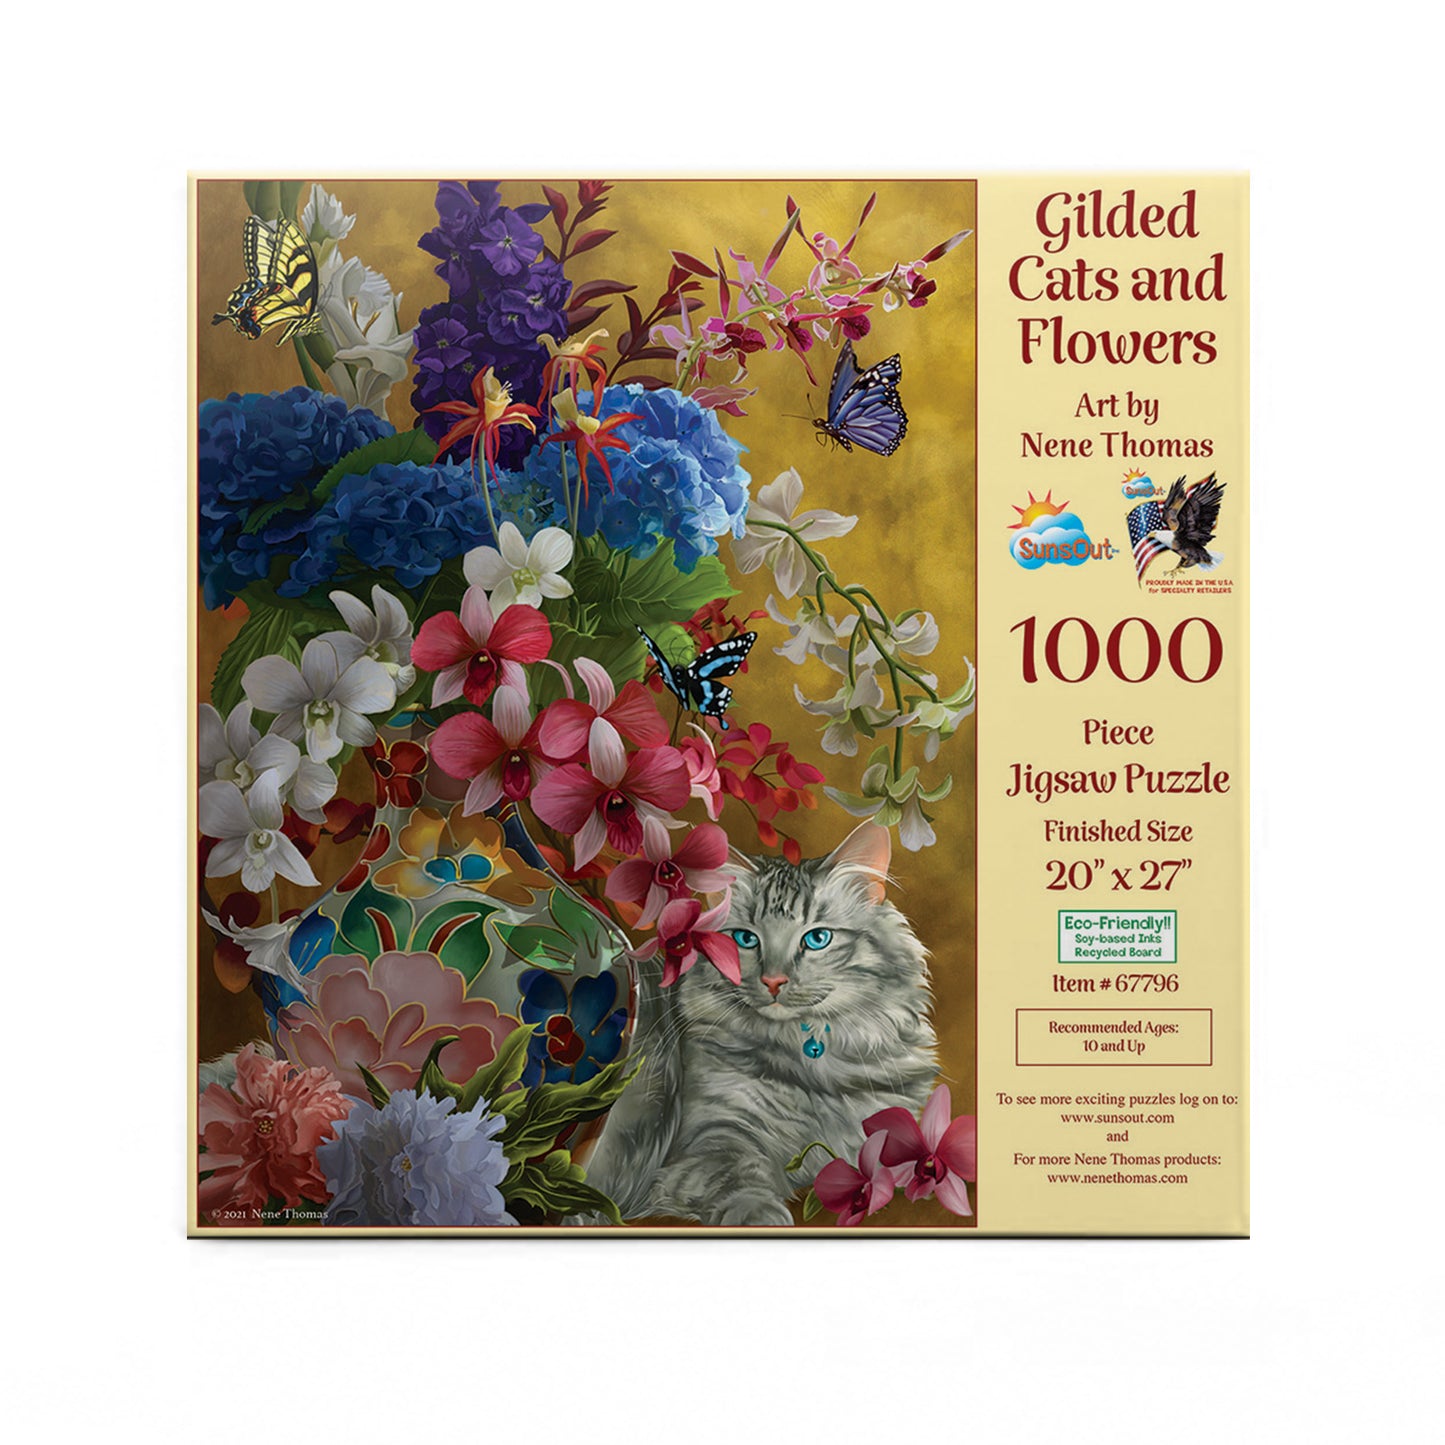 Gilded Cats and Flowers by Nene Thomas, 1000 Piece Puzzle